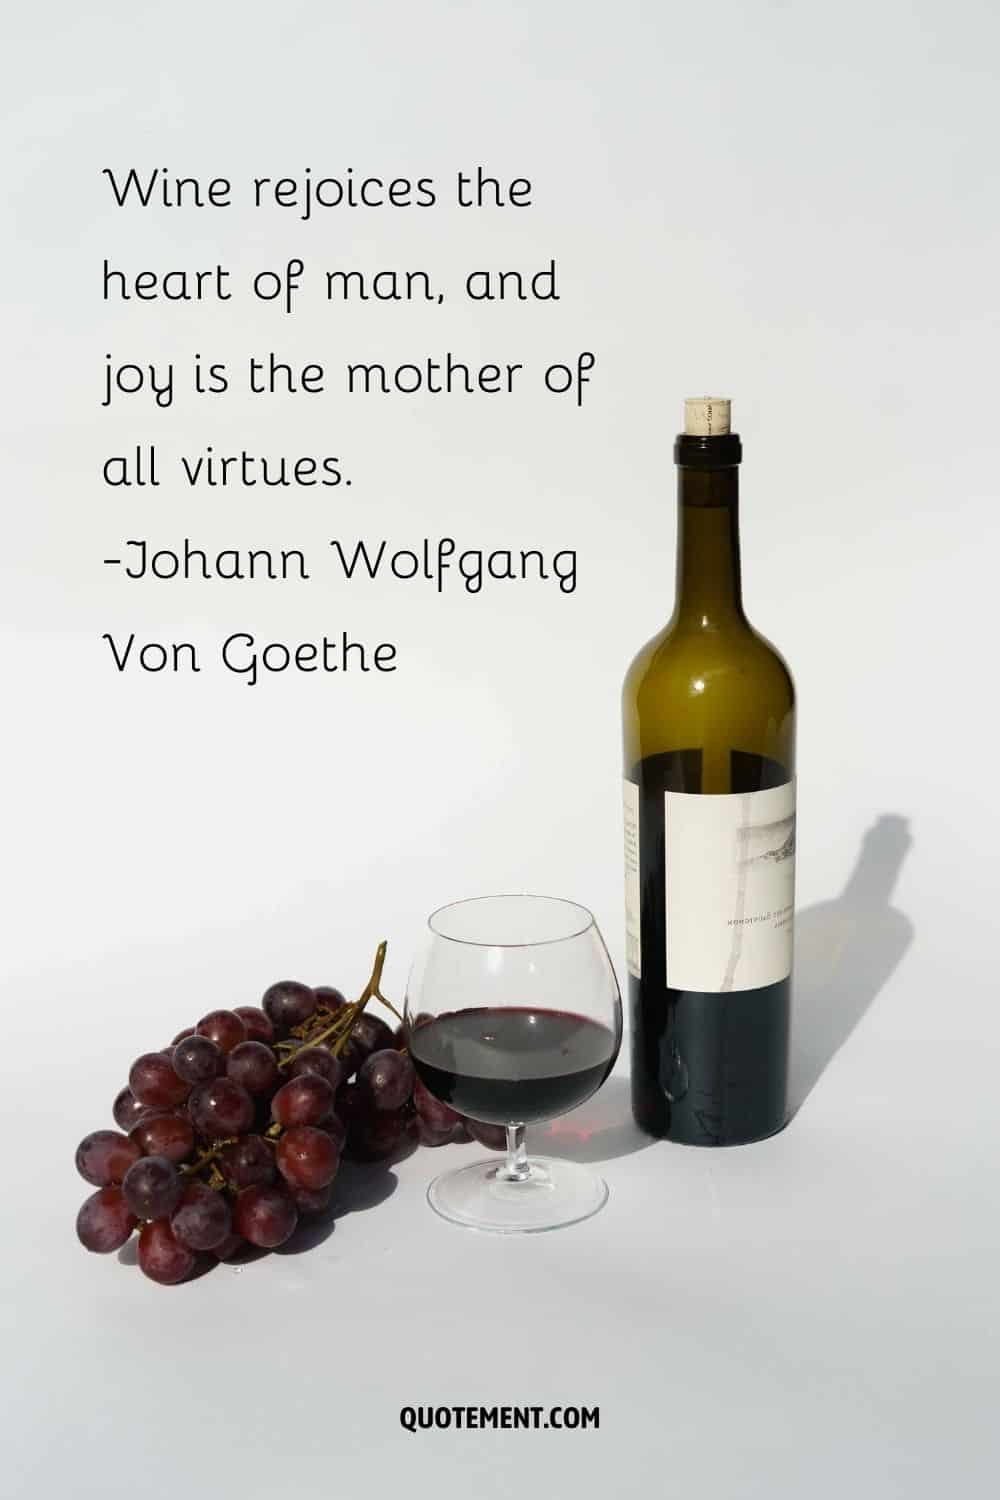 Wine rejoices the heart of man, and joy is the mother of all virtues